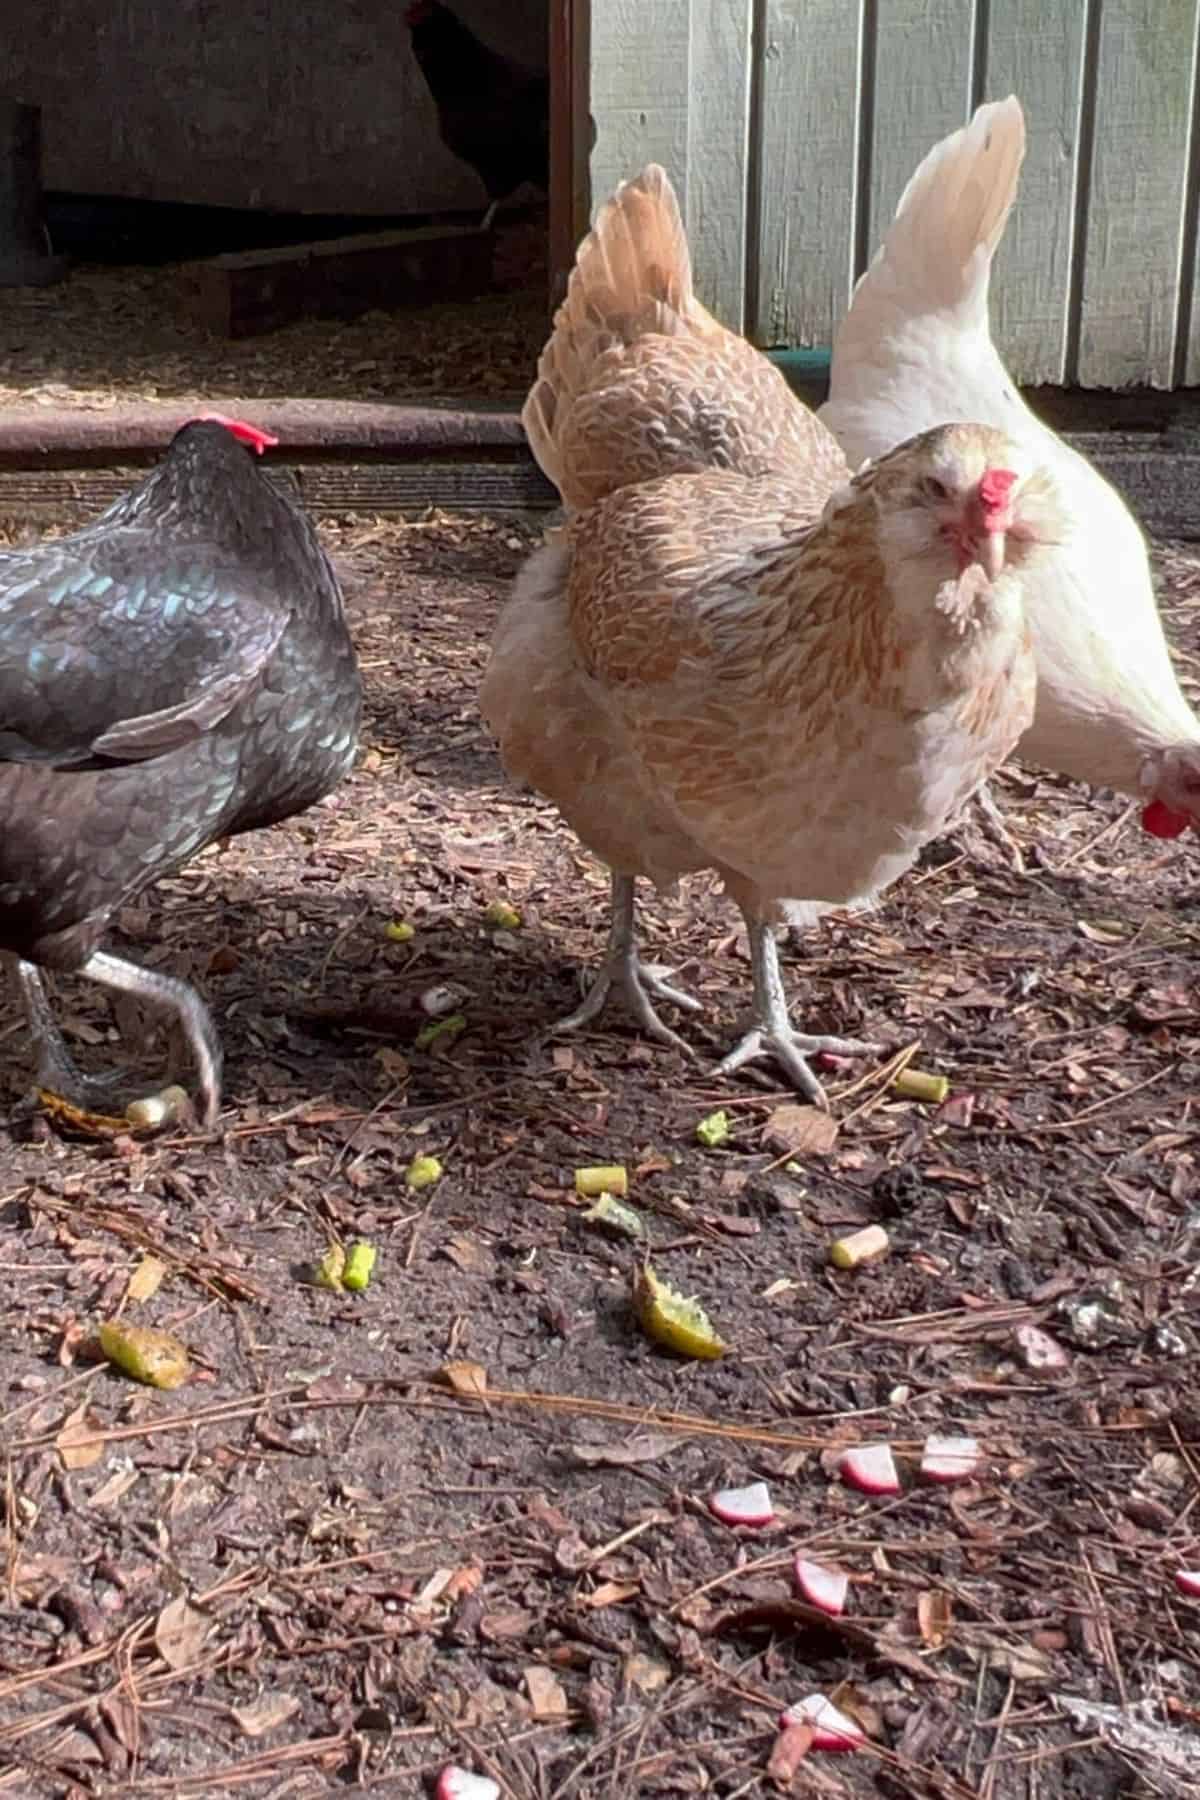 Three chickens pecking asparagus on the ground.